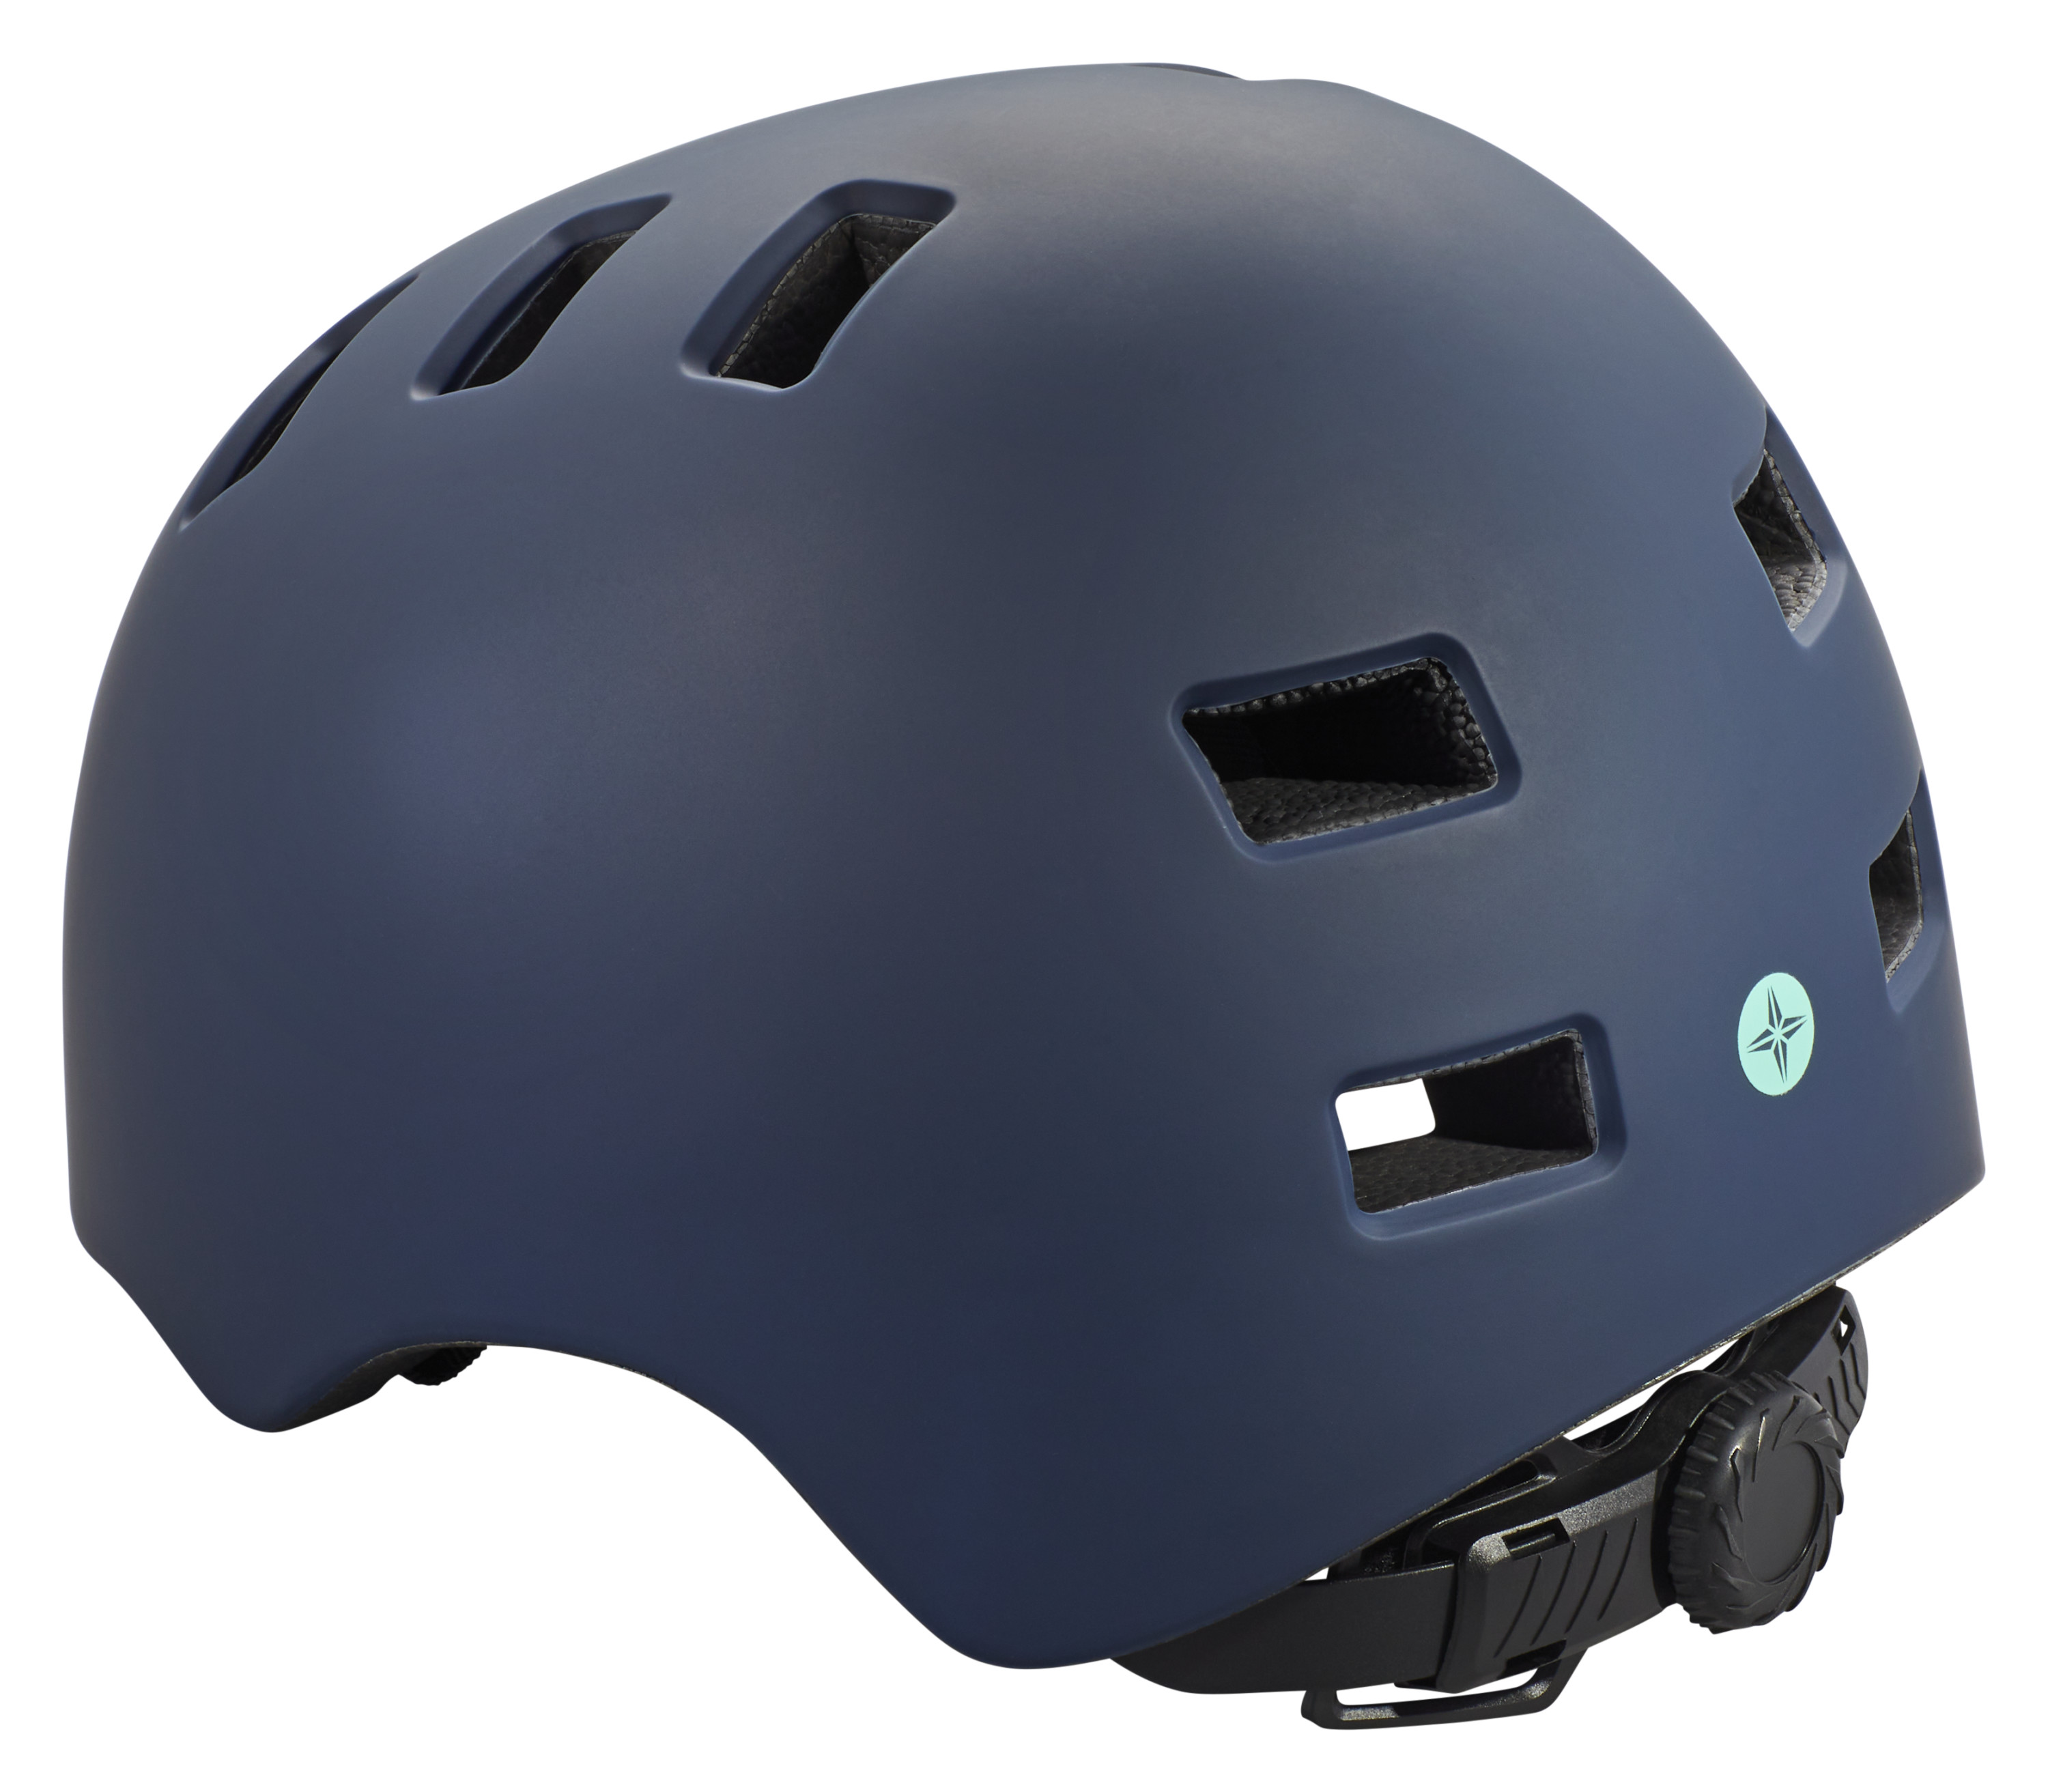 Schwinn Prospect Unisex Bicycle Helmet for Adults, Ages 14 and Up, Navy Blue - image 2 of 7